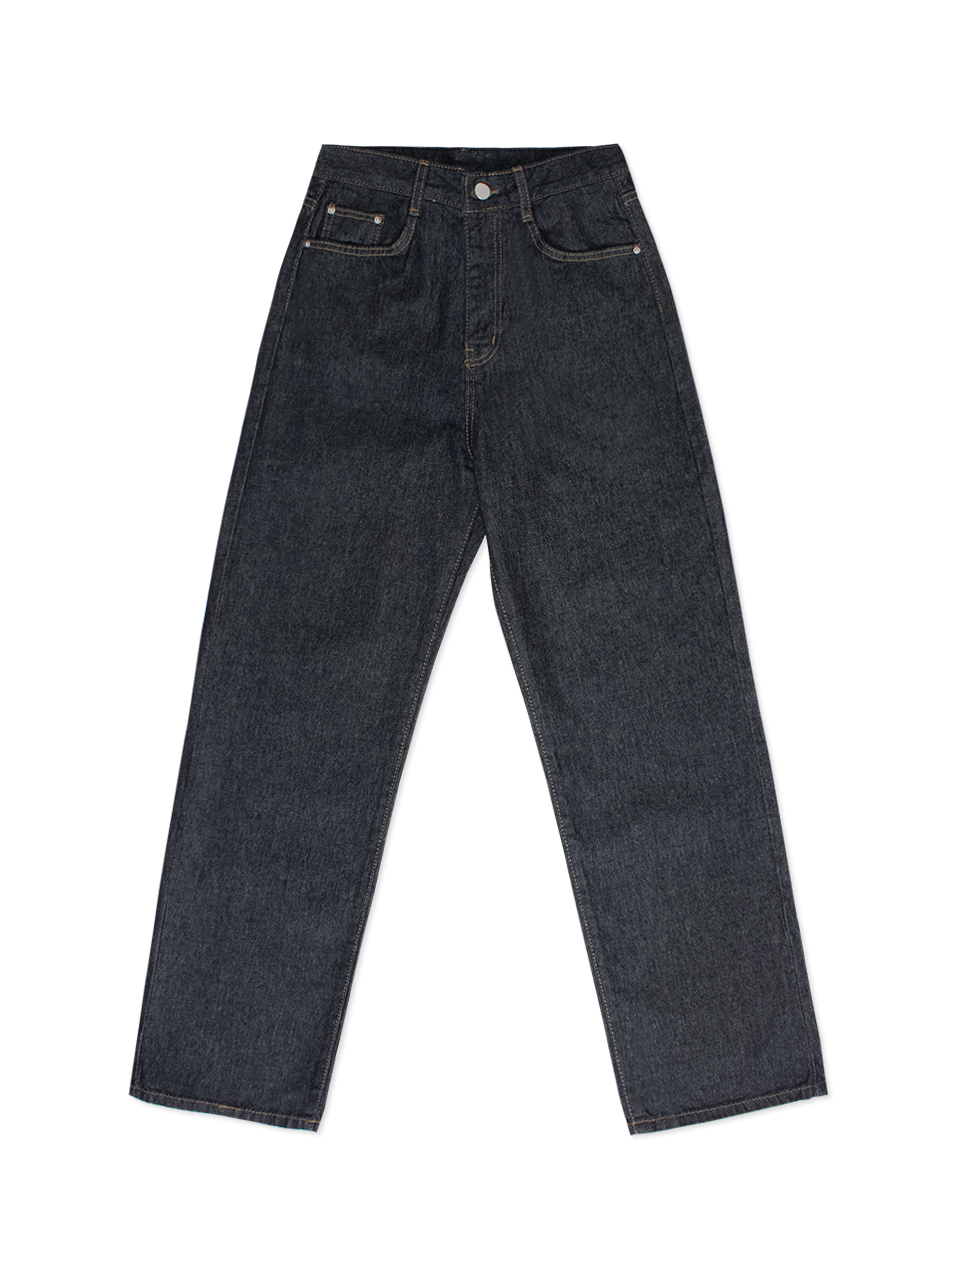 [WIDE] Tool Jeans